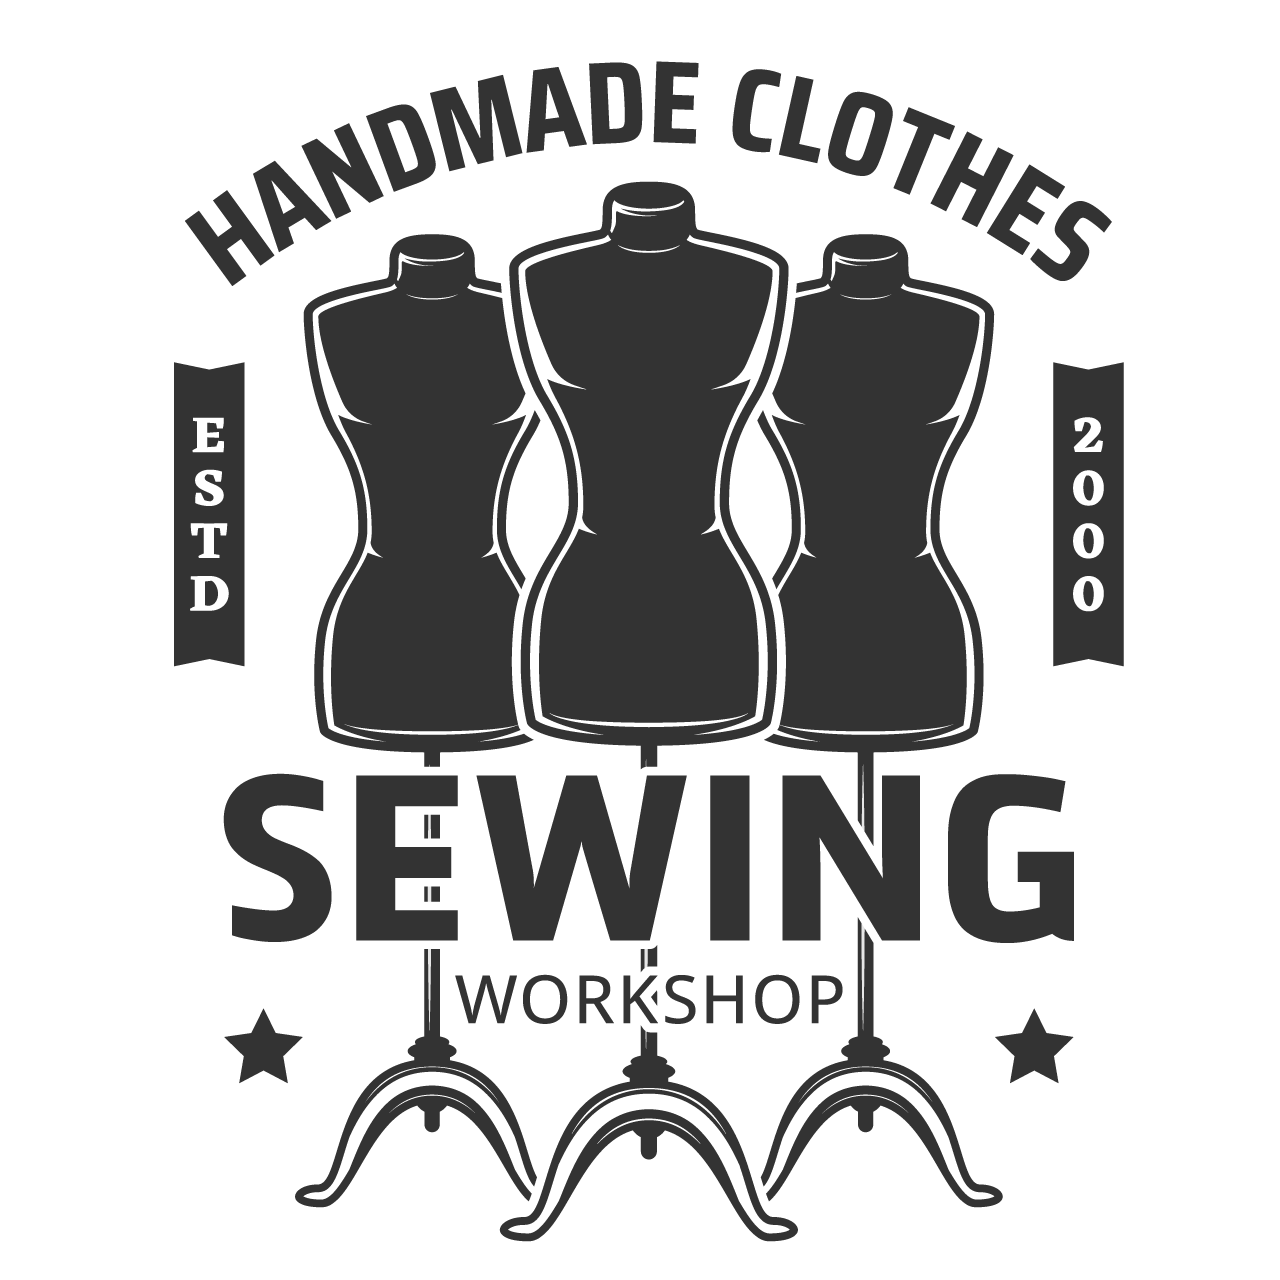 Tailor clipart sewing industry retro icon with mannequins